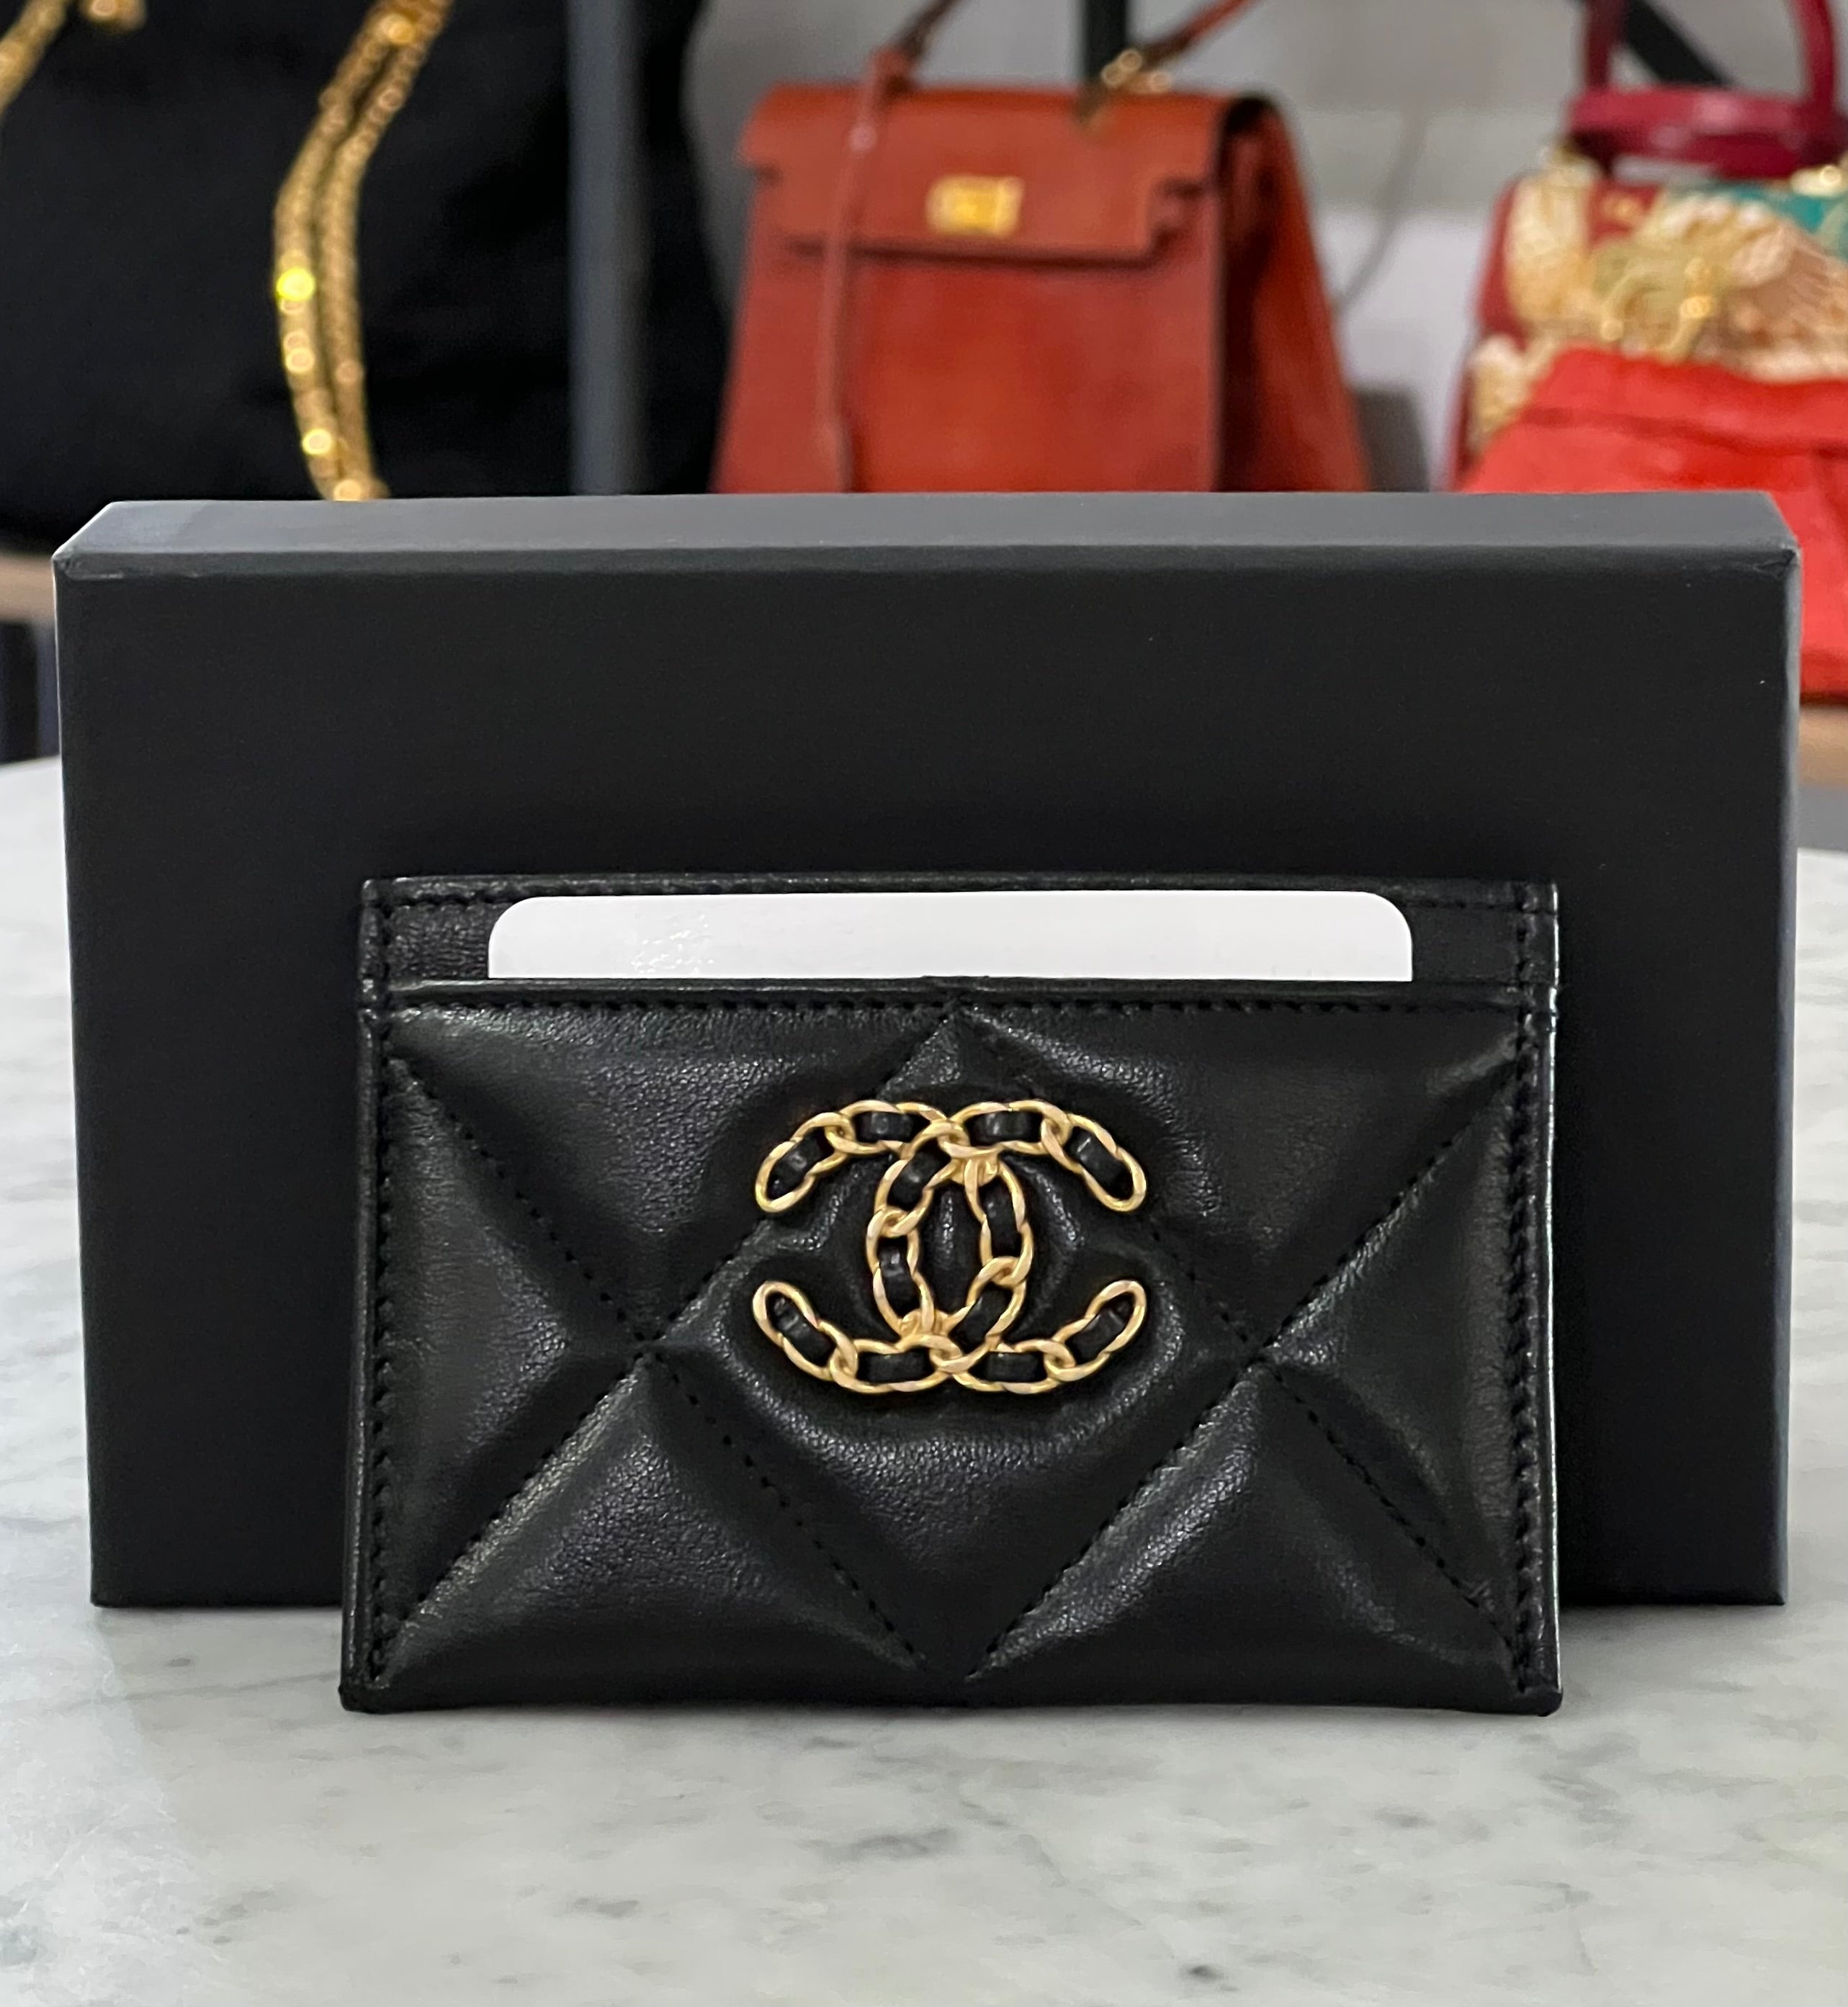 Chanel 19 leather wallet